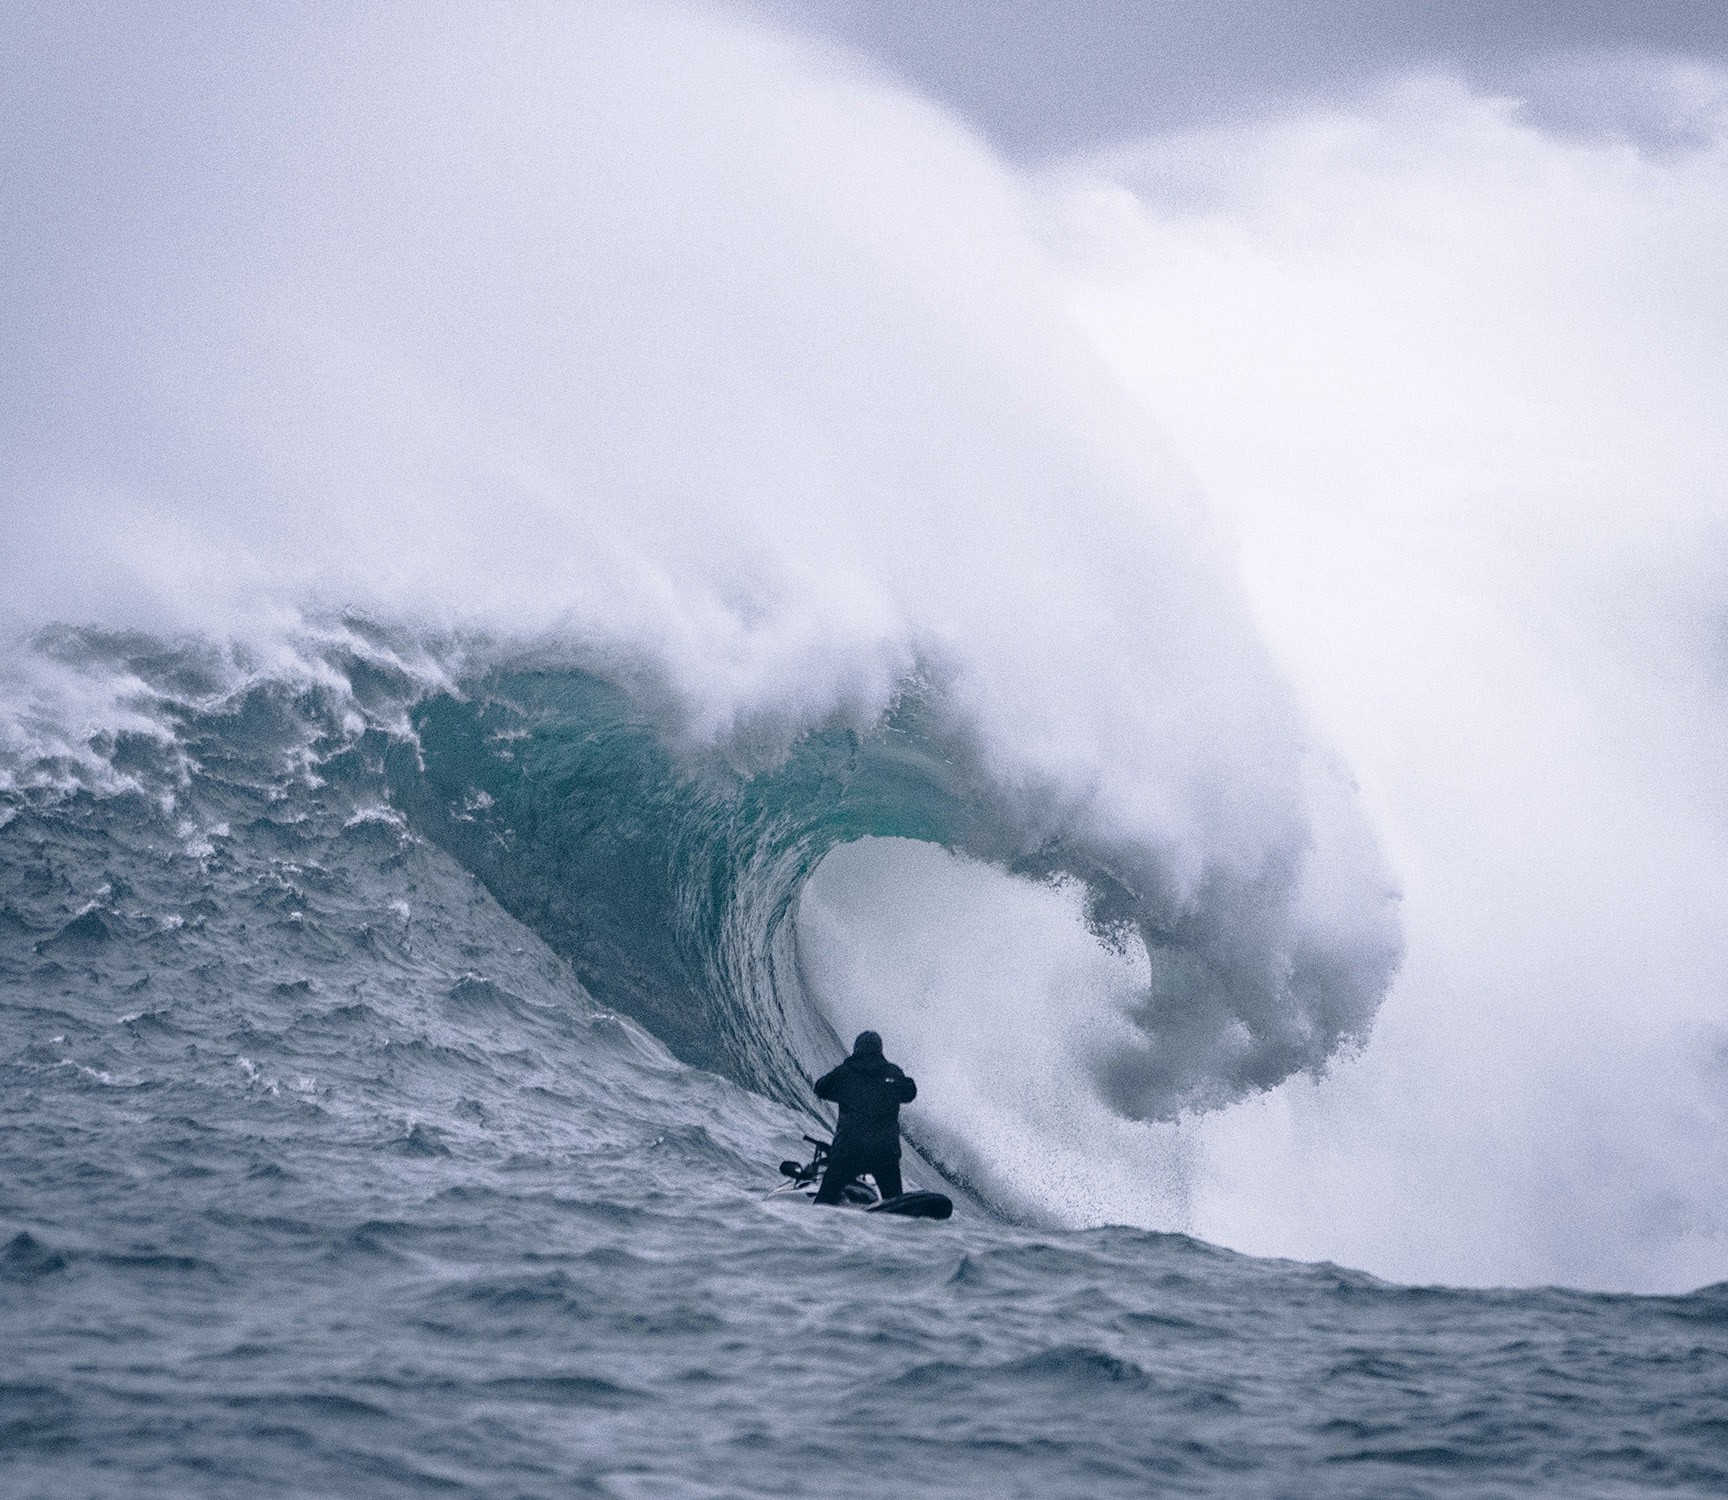 GoFundMe Campaign Launched to Support Mavericks Safety and Footage